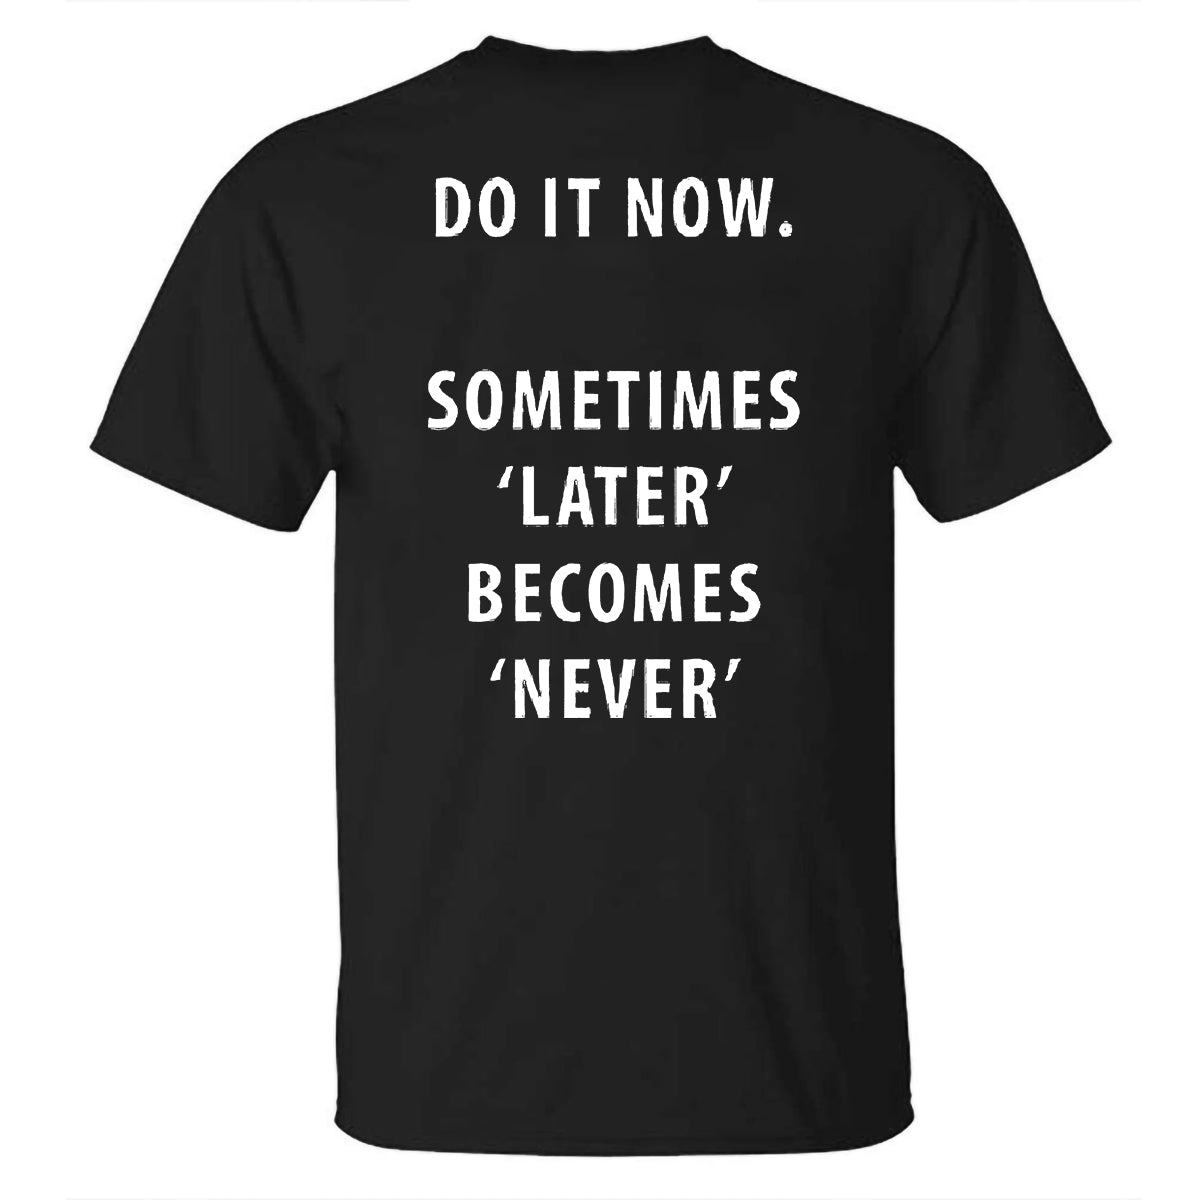 Do It Now. Sometimes 'Later' Become 'Never'  Printed T-shirt